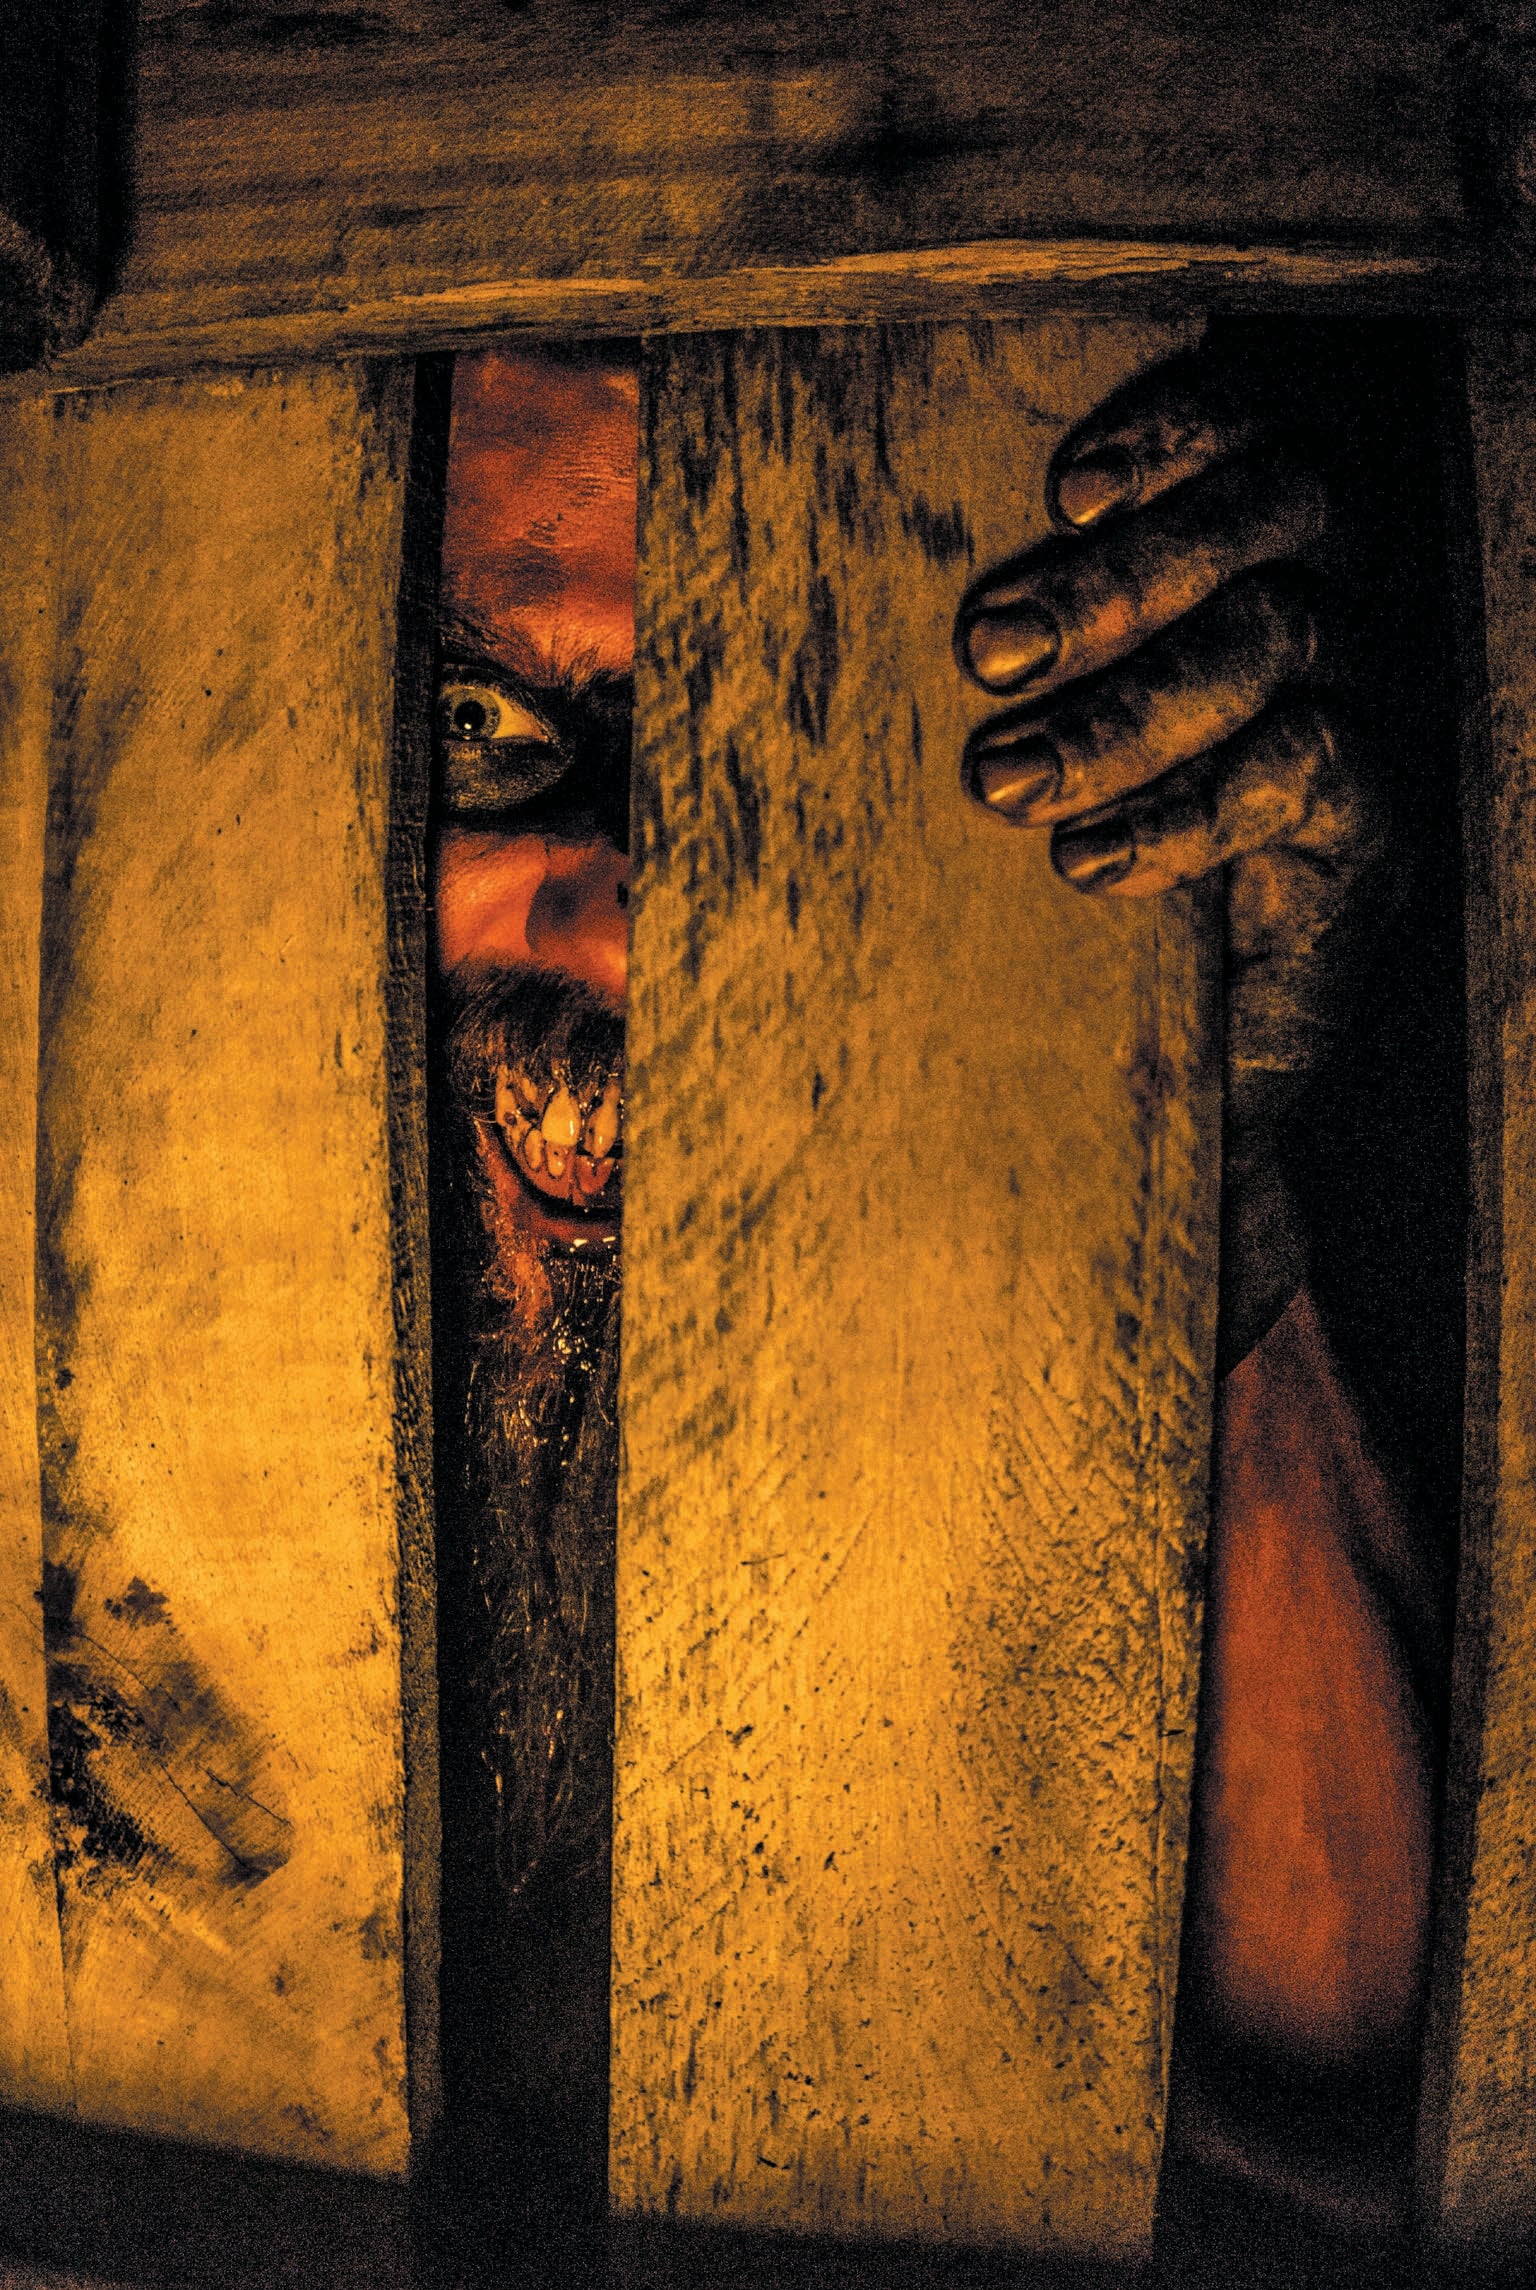 A person dressed up as a horror creature with a disturbing smile shown peering between the planks of a wood fence.